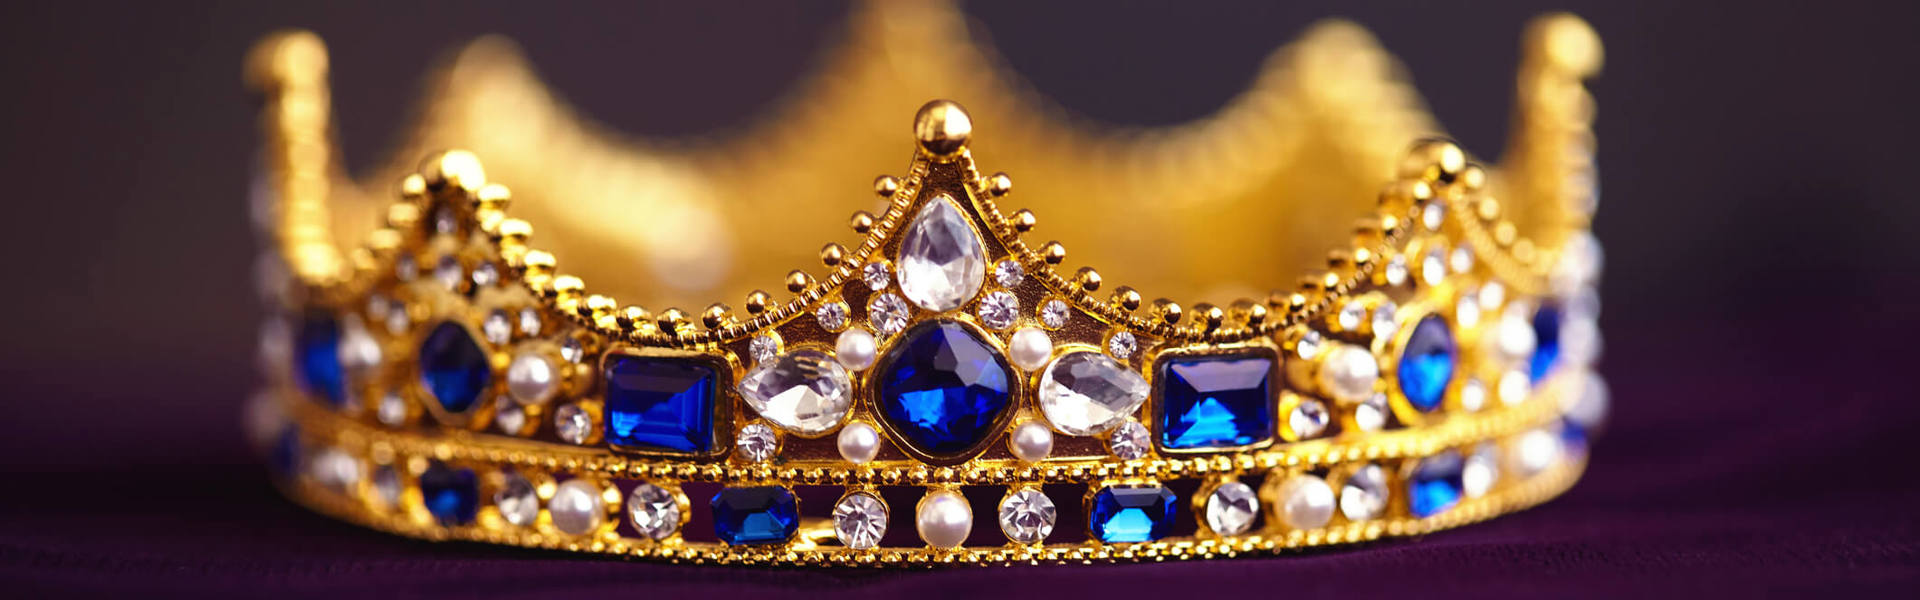 a gold grown with sapphire jewels 